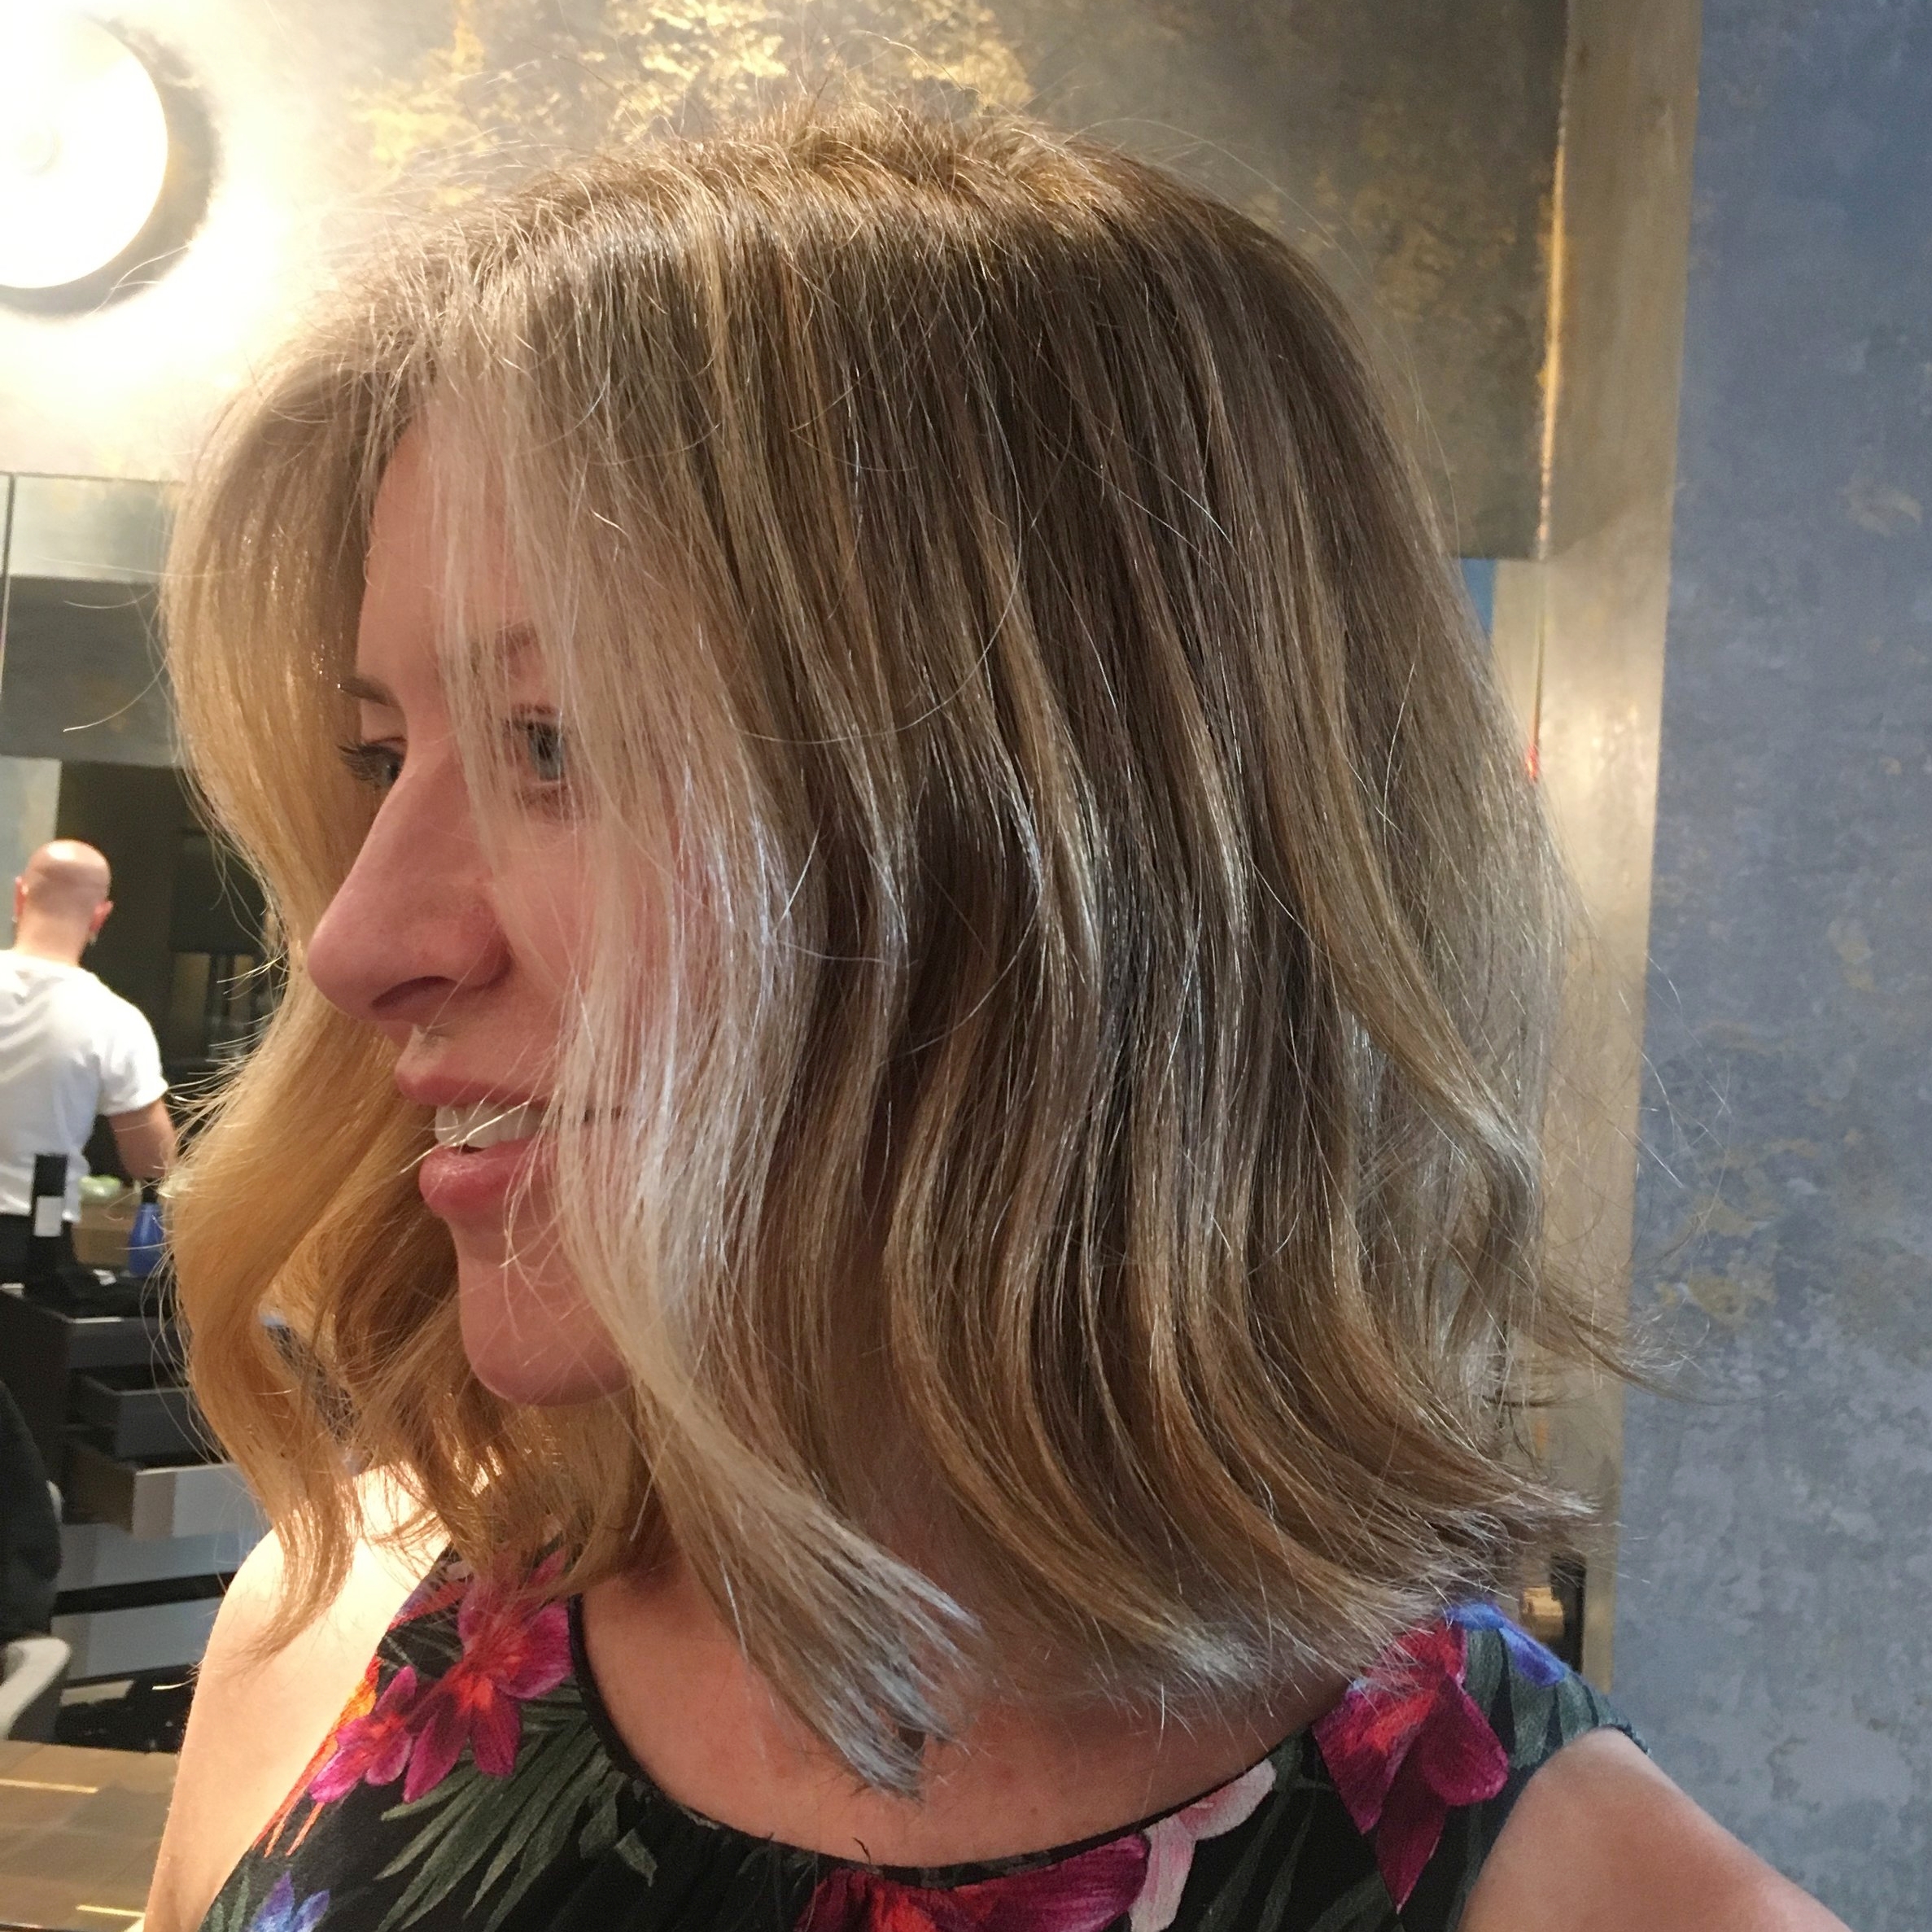  Shiny, natural-looking dark blonde -  bespoke herbal colour by Gennaro dell'Aquila  